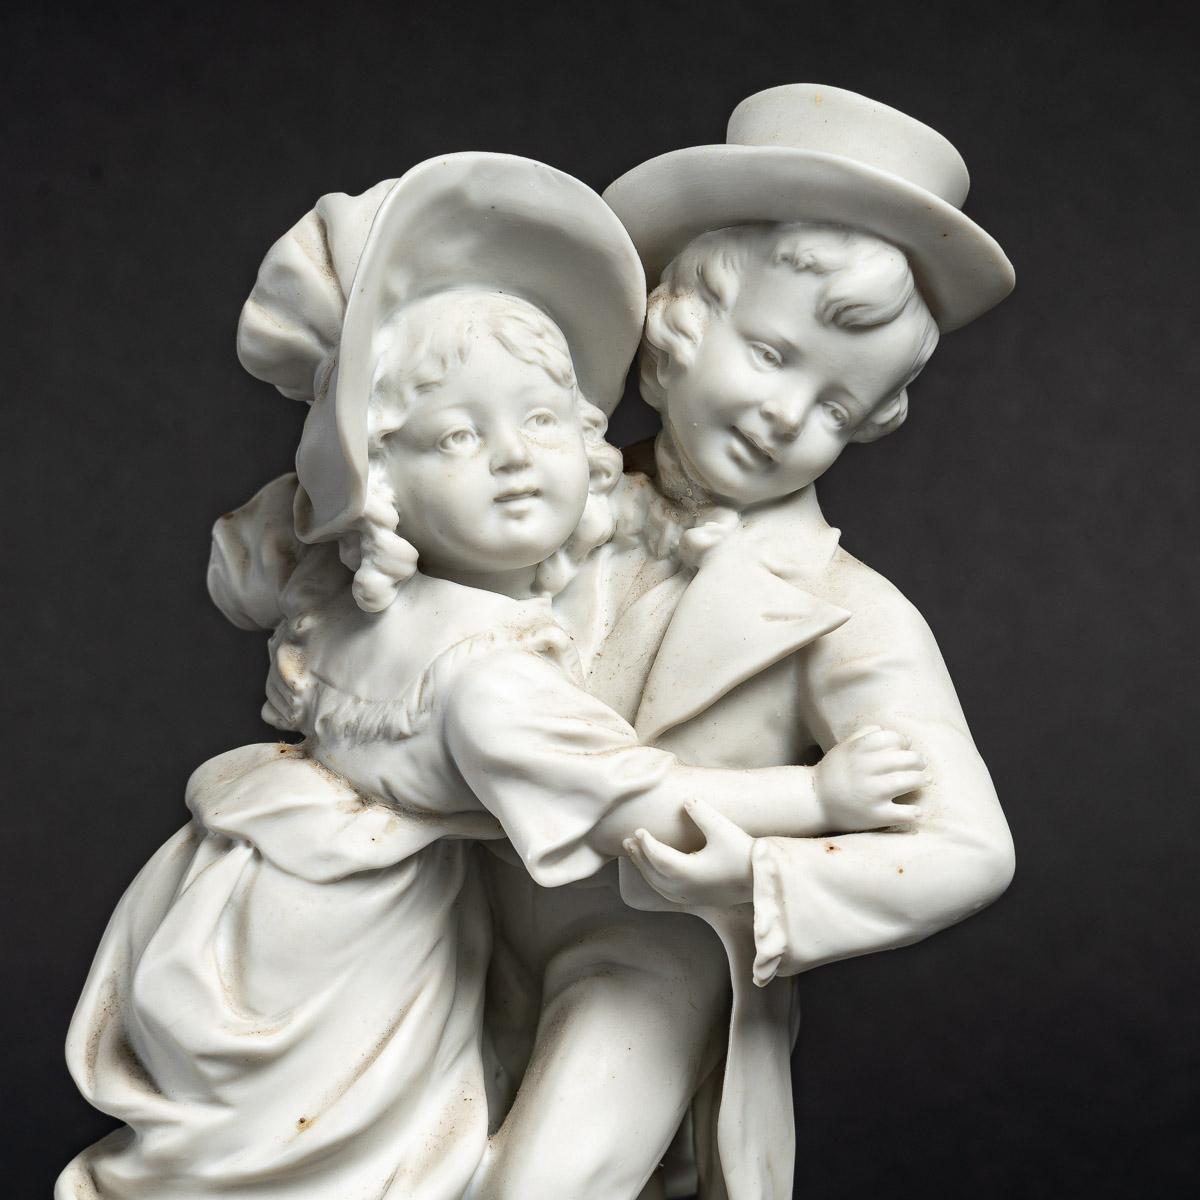 Pair of small Biscuit sculptures, early 20th century 1